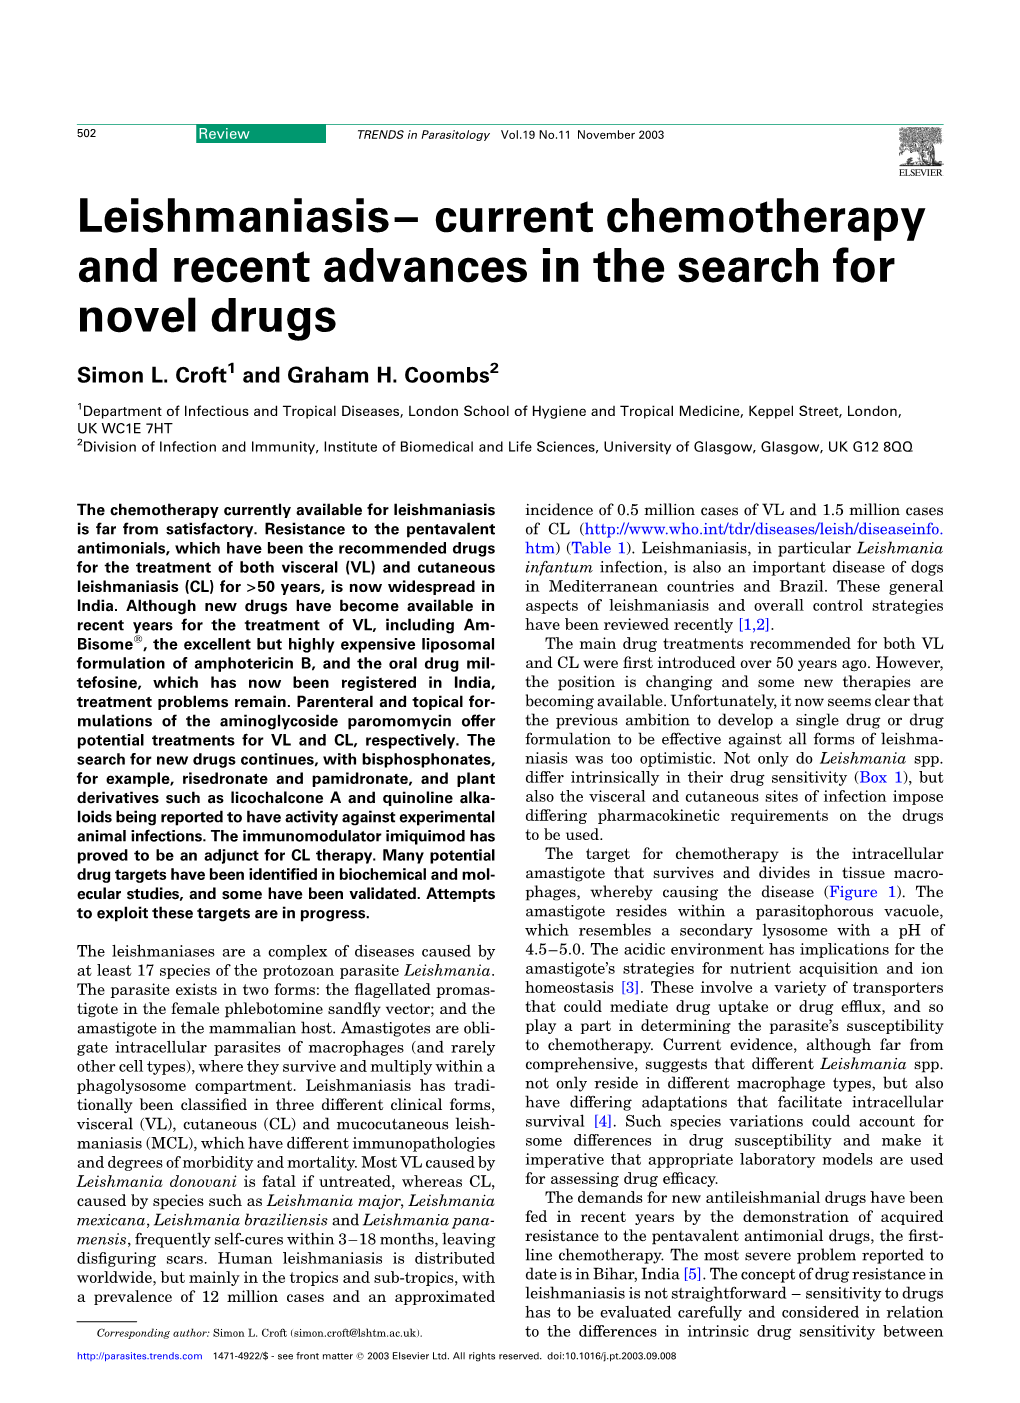 Leishmaniasis– Current Chemotherapy and Recent Advances in the Search for Novel Drugs